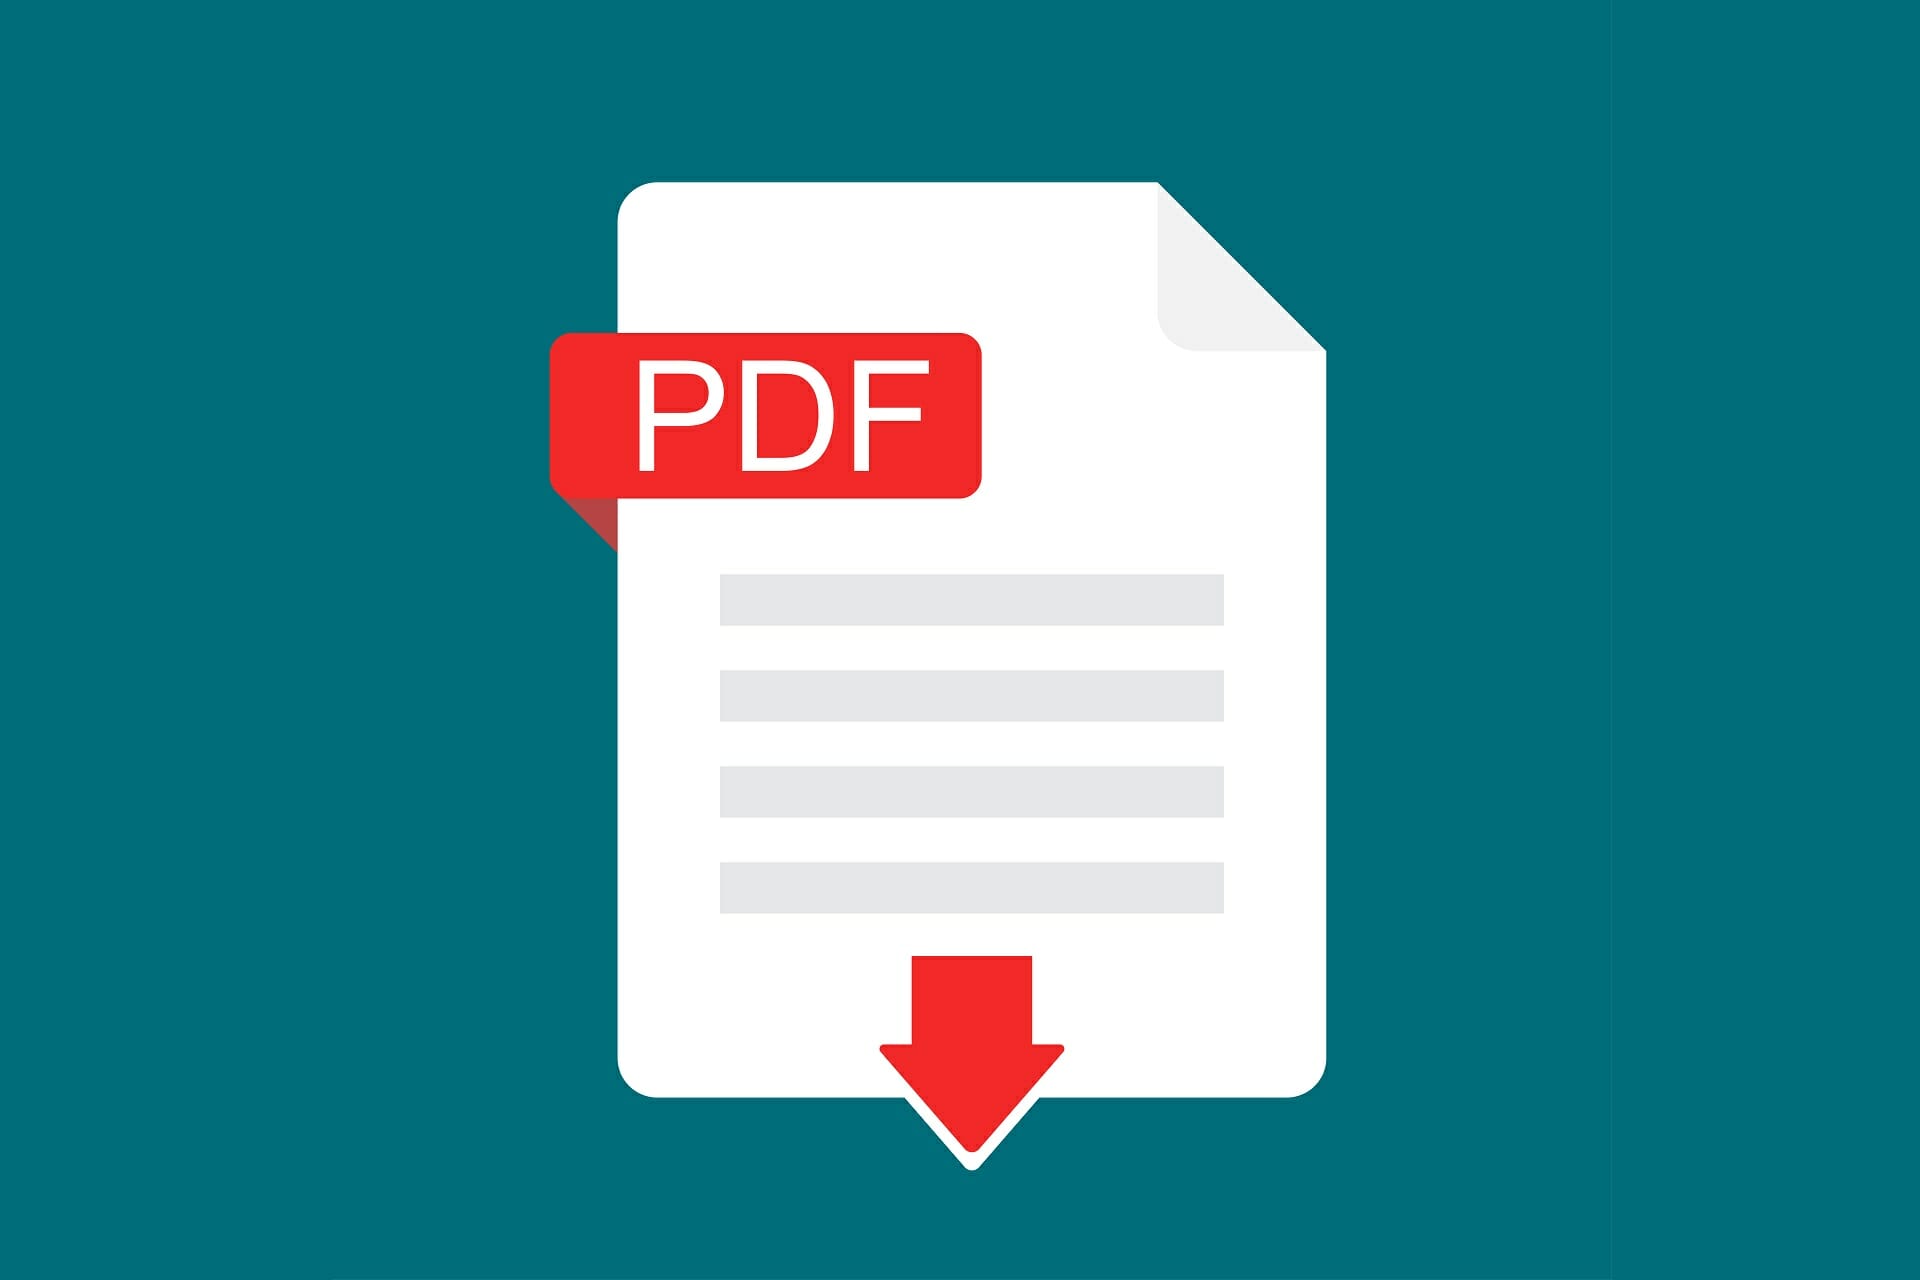 5 Best Free Pdf Reading Software For Windows 10 Pdf reader out loud free